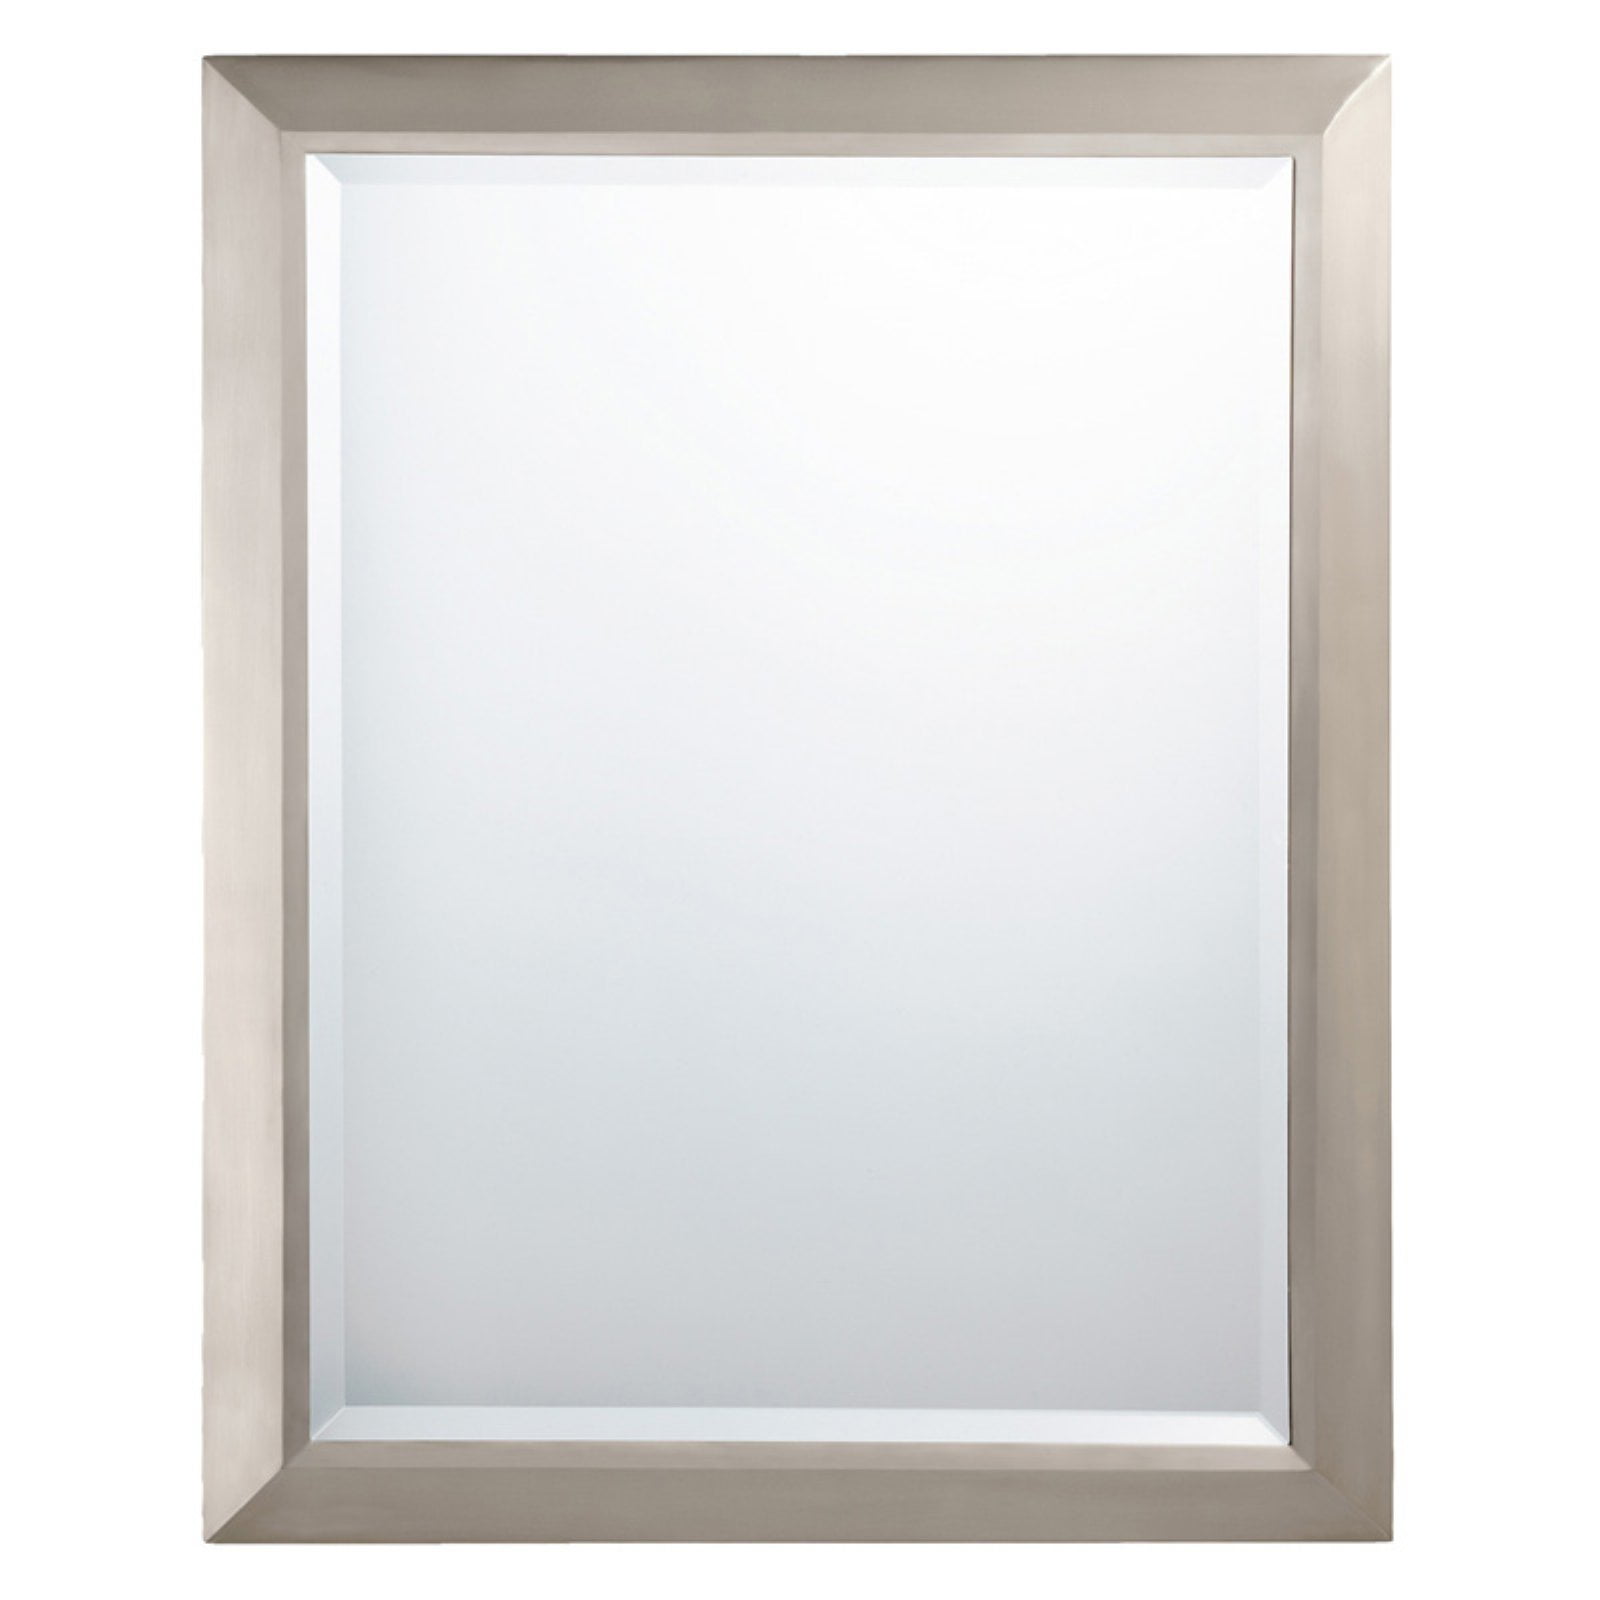 Aptations 21873 Minimalist Rectangular Wall Mirror In Brushed Nickel for sale online Br 